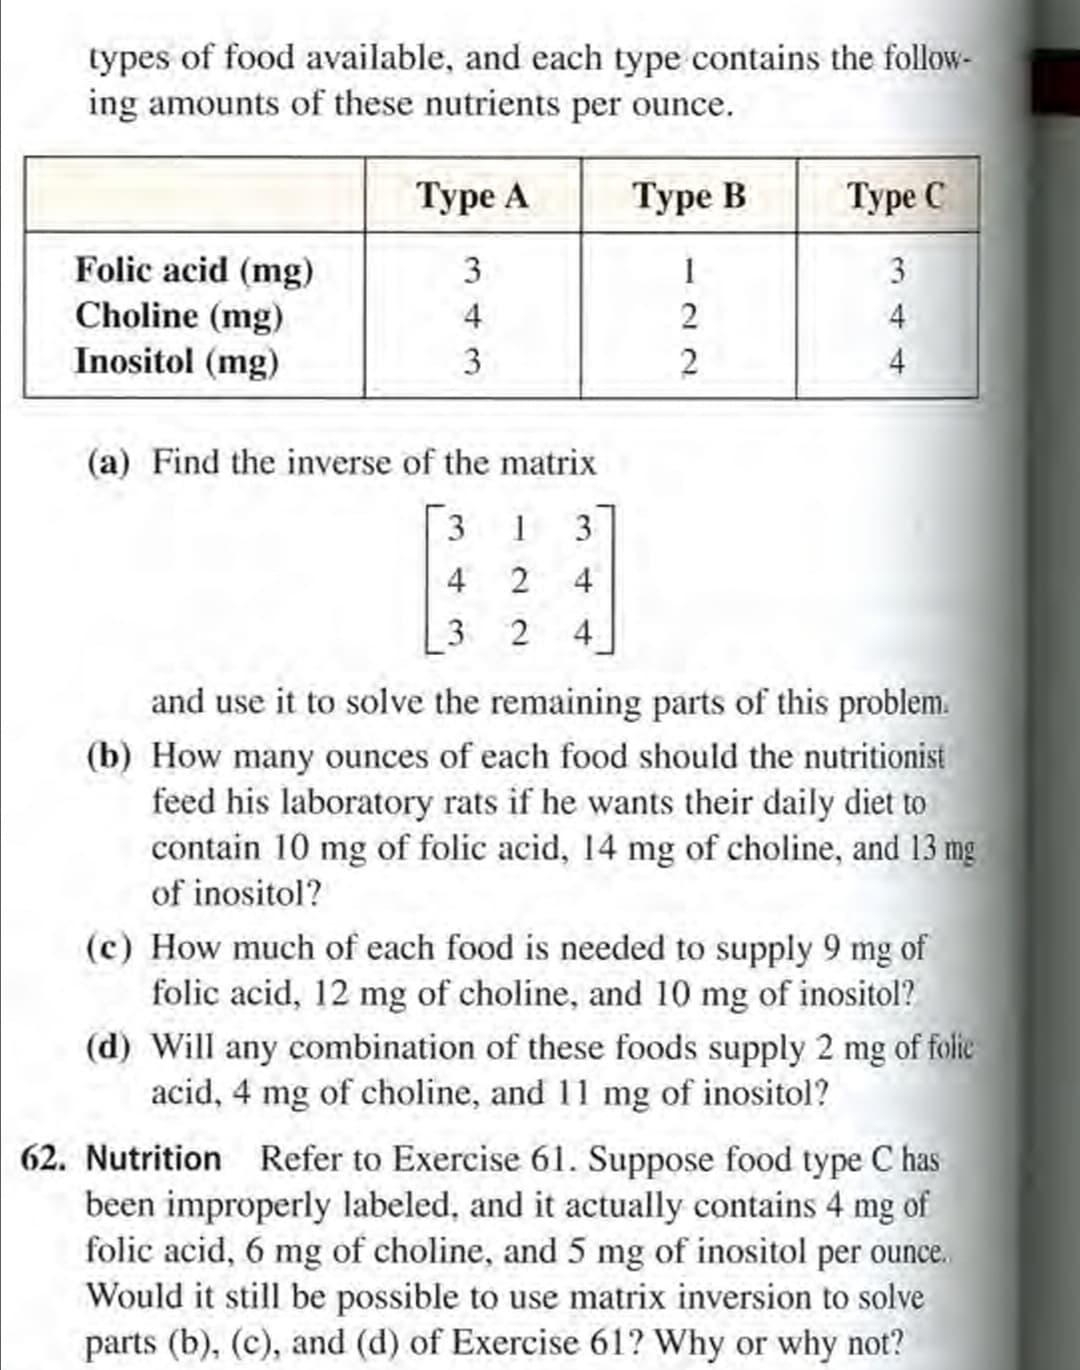 - Nutrition Refer to Exercise 61. Suppose food type C has
been improperly labeled, and it actually contains 4 mg of
folic acid, 6 mg of choline, and 5 mg of inositol per ounce.
Would it still be possible to use matrix inversion to solve
parts (b), (c), and (d) of Exercise 61? Why or why not?
